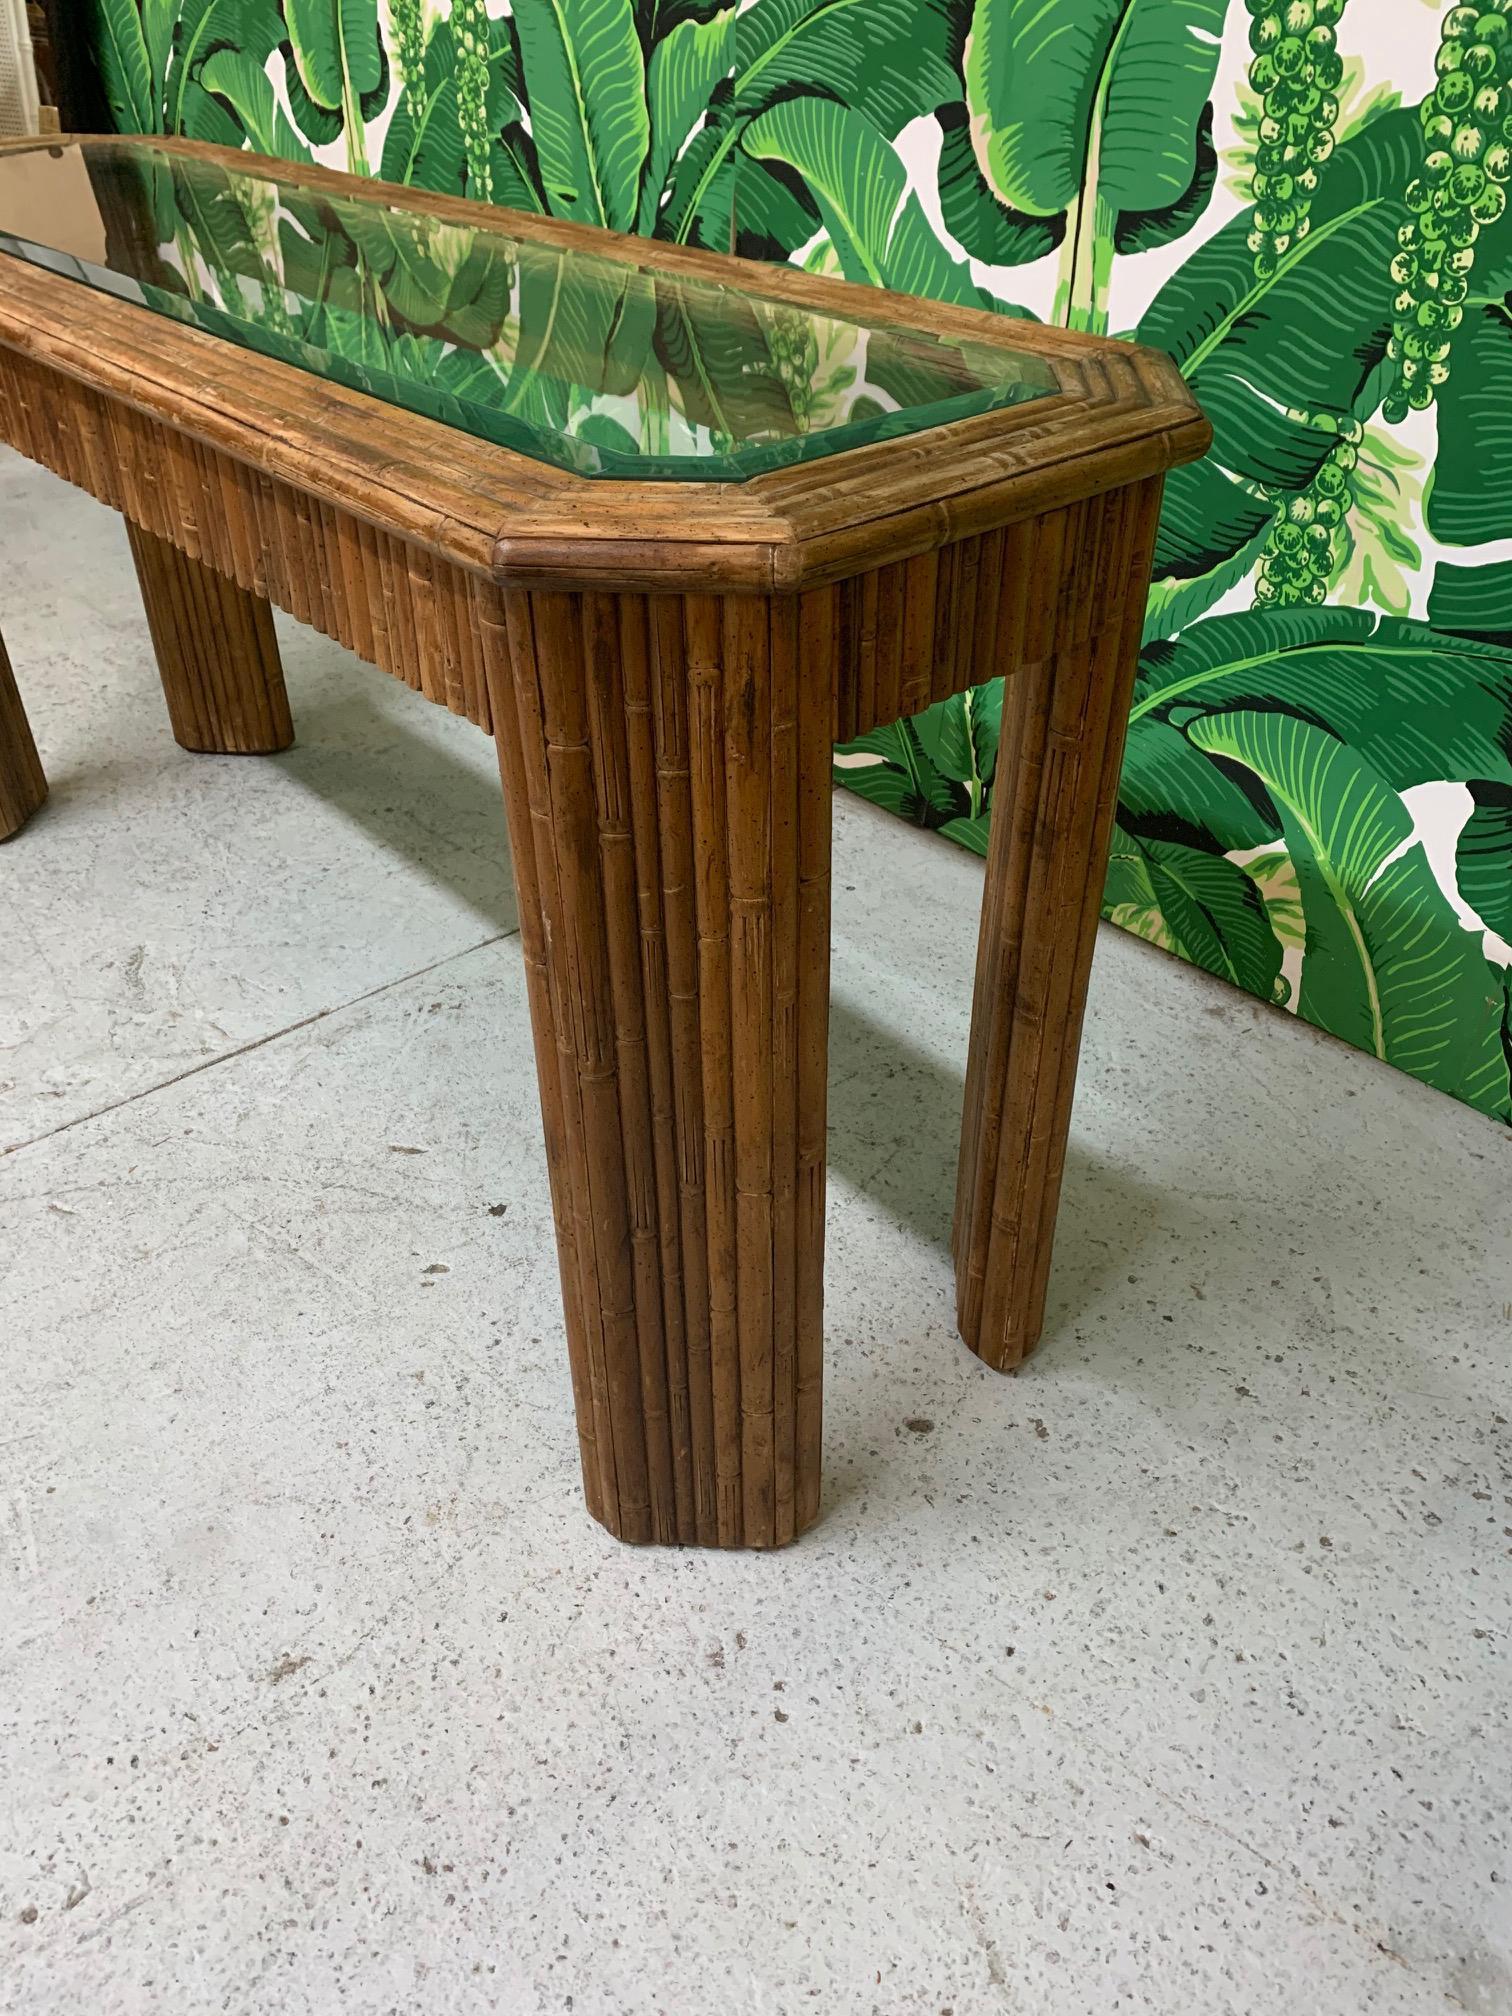 Vintage Faux Bamboo Console Table In Good Condition For Sale In Jacksonville, FL